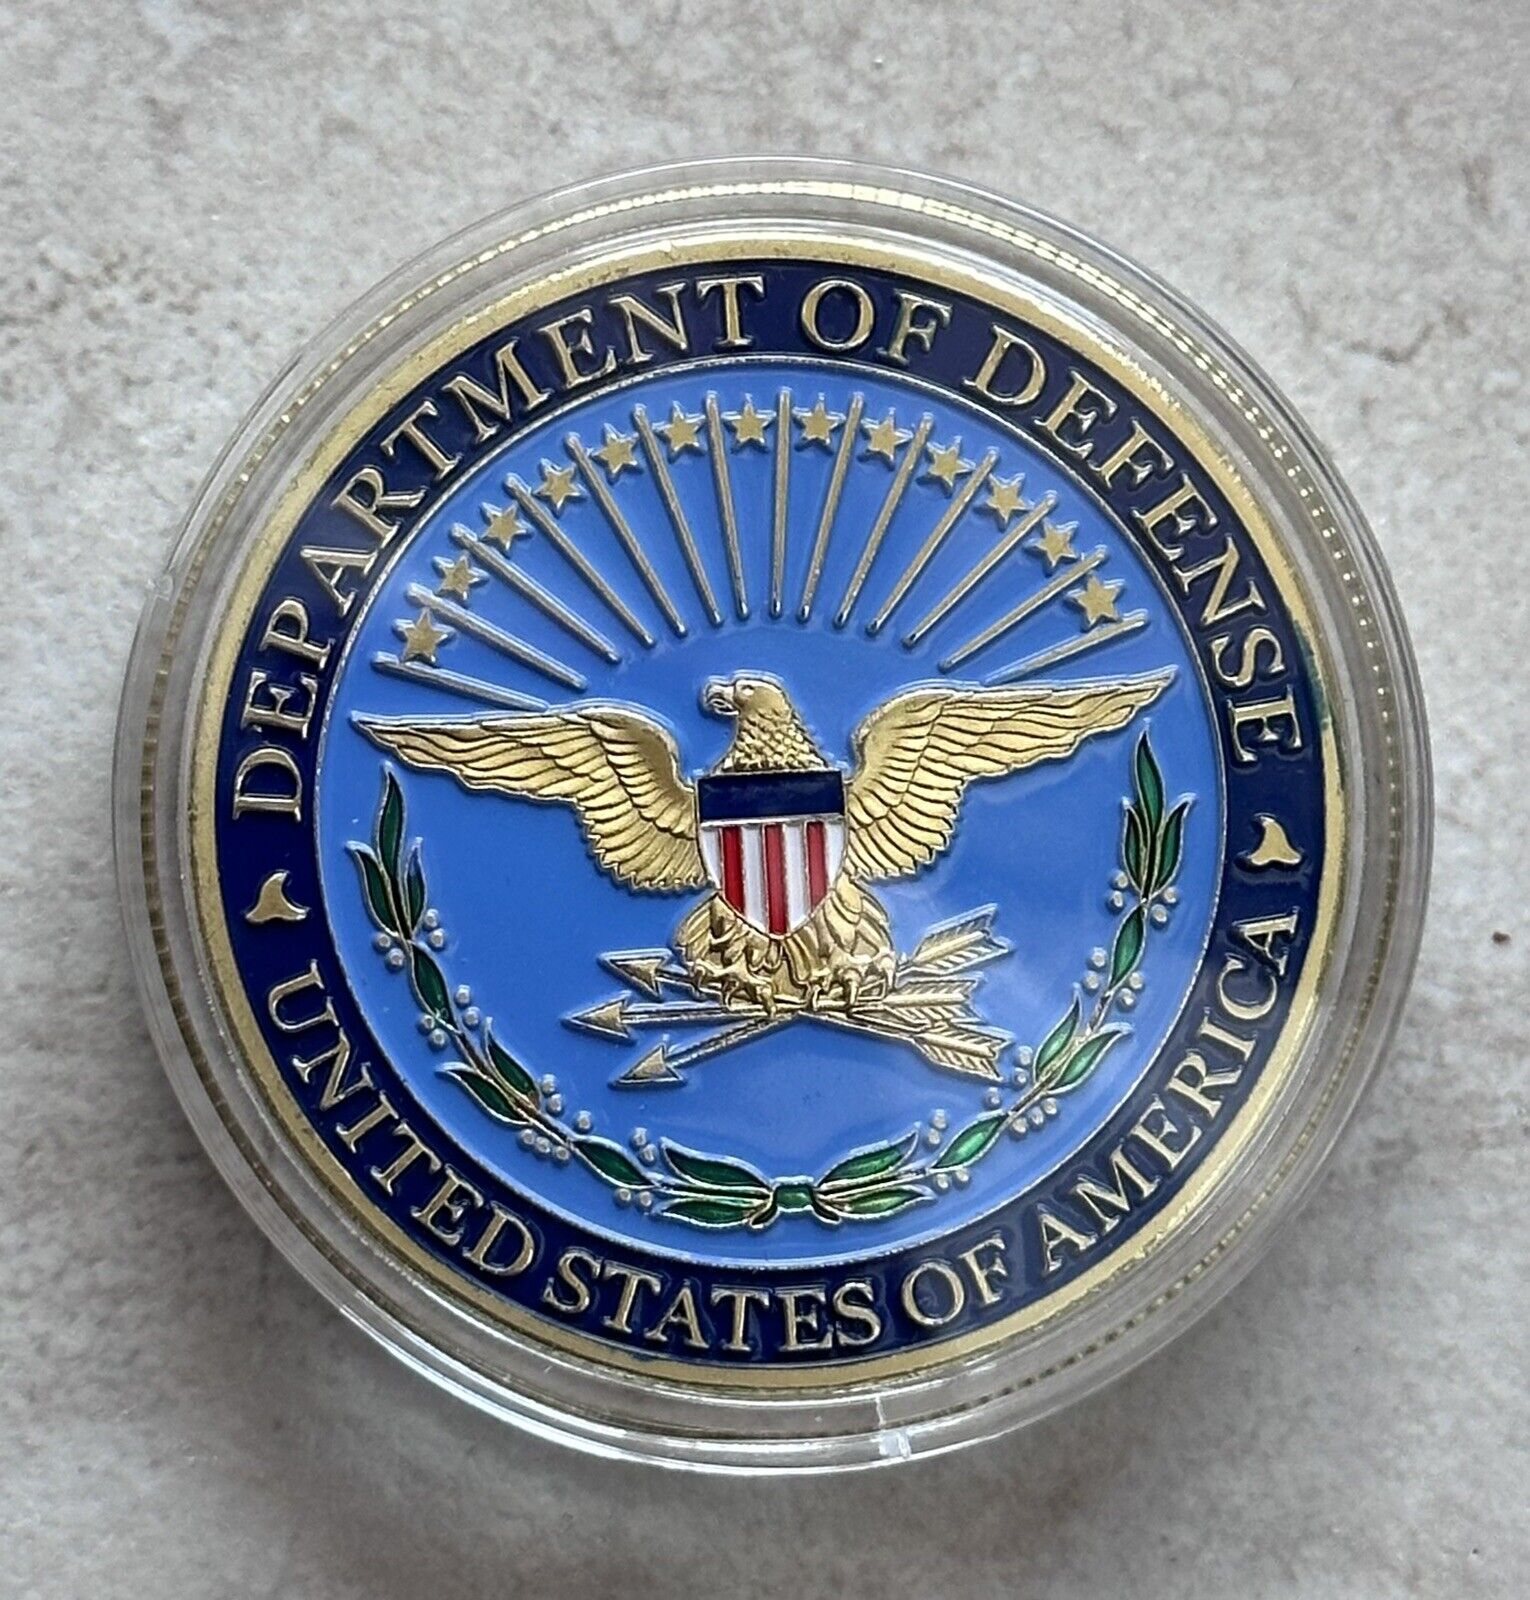 DoD Military United States Department of Defense Challenge Coin